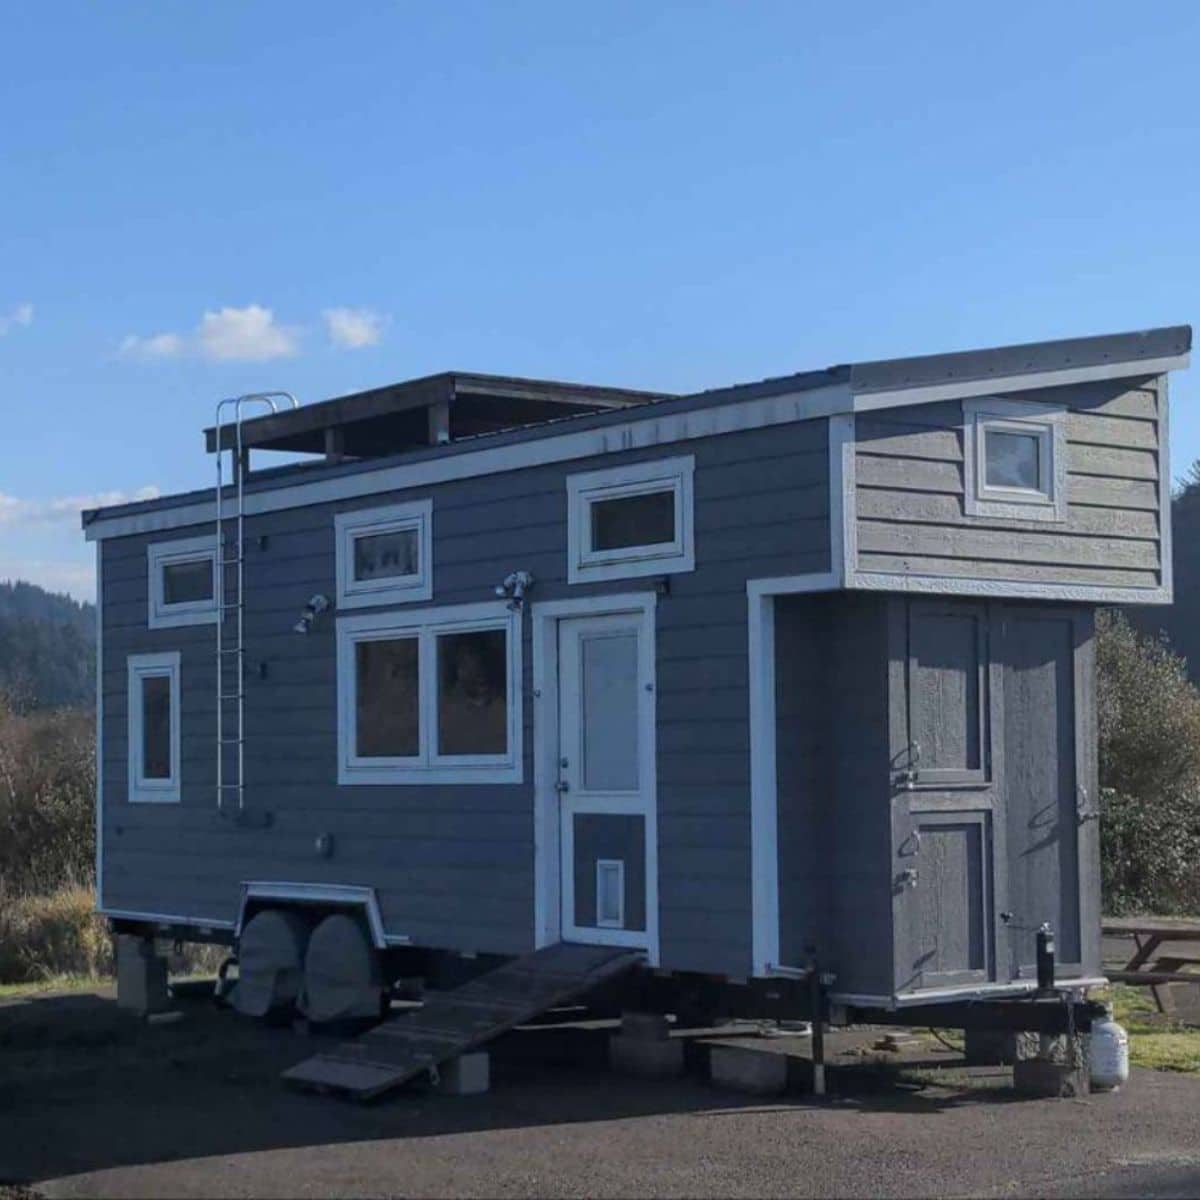 2 Bedroom Tiny House Is Off-Grid Capable, Turnkey Ready